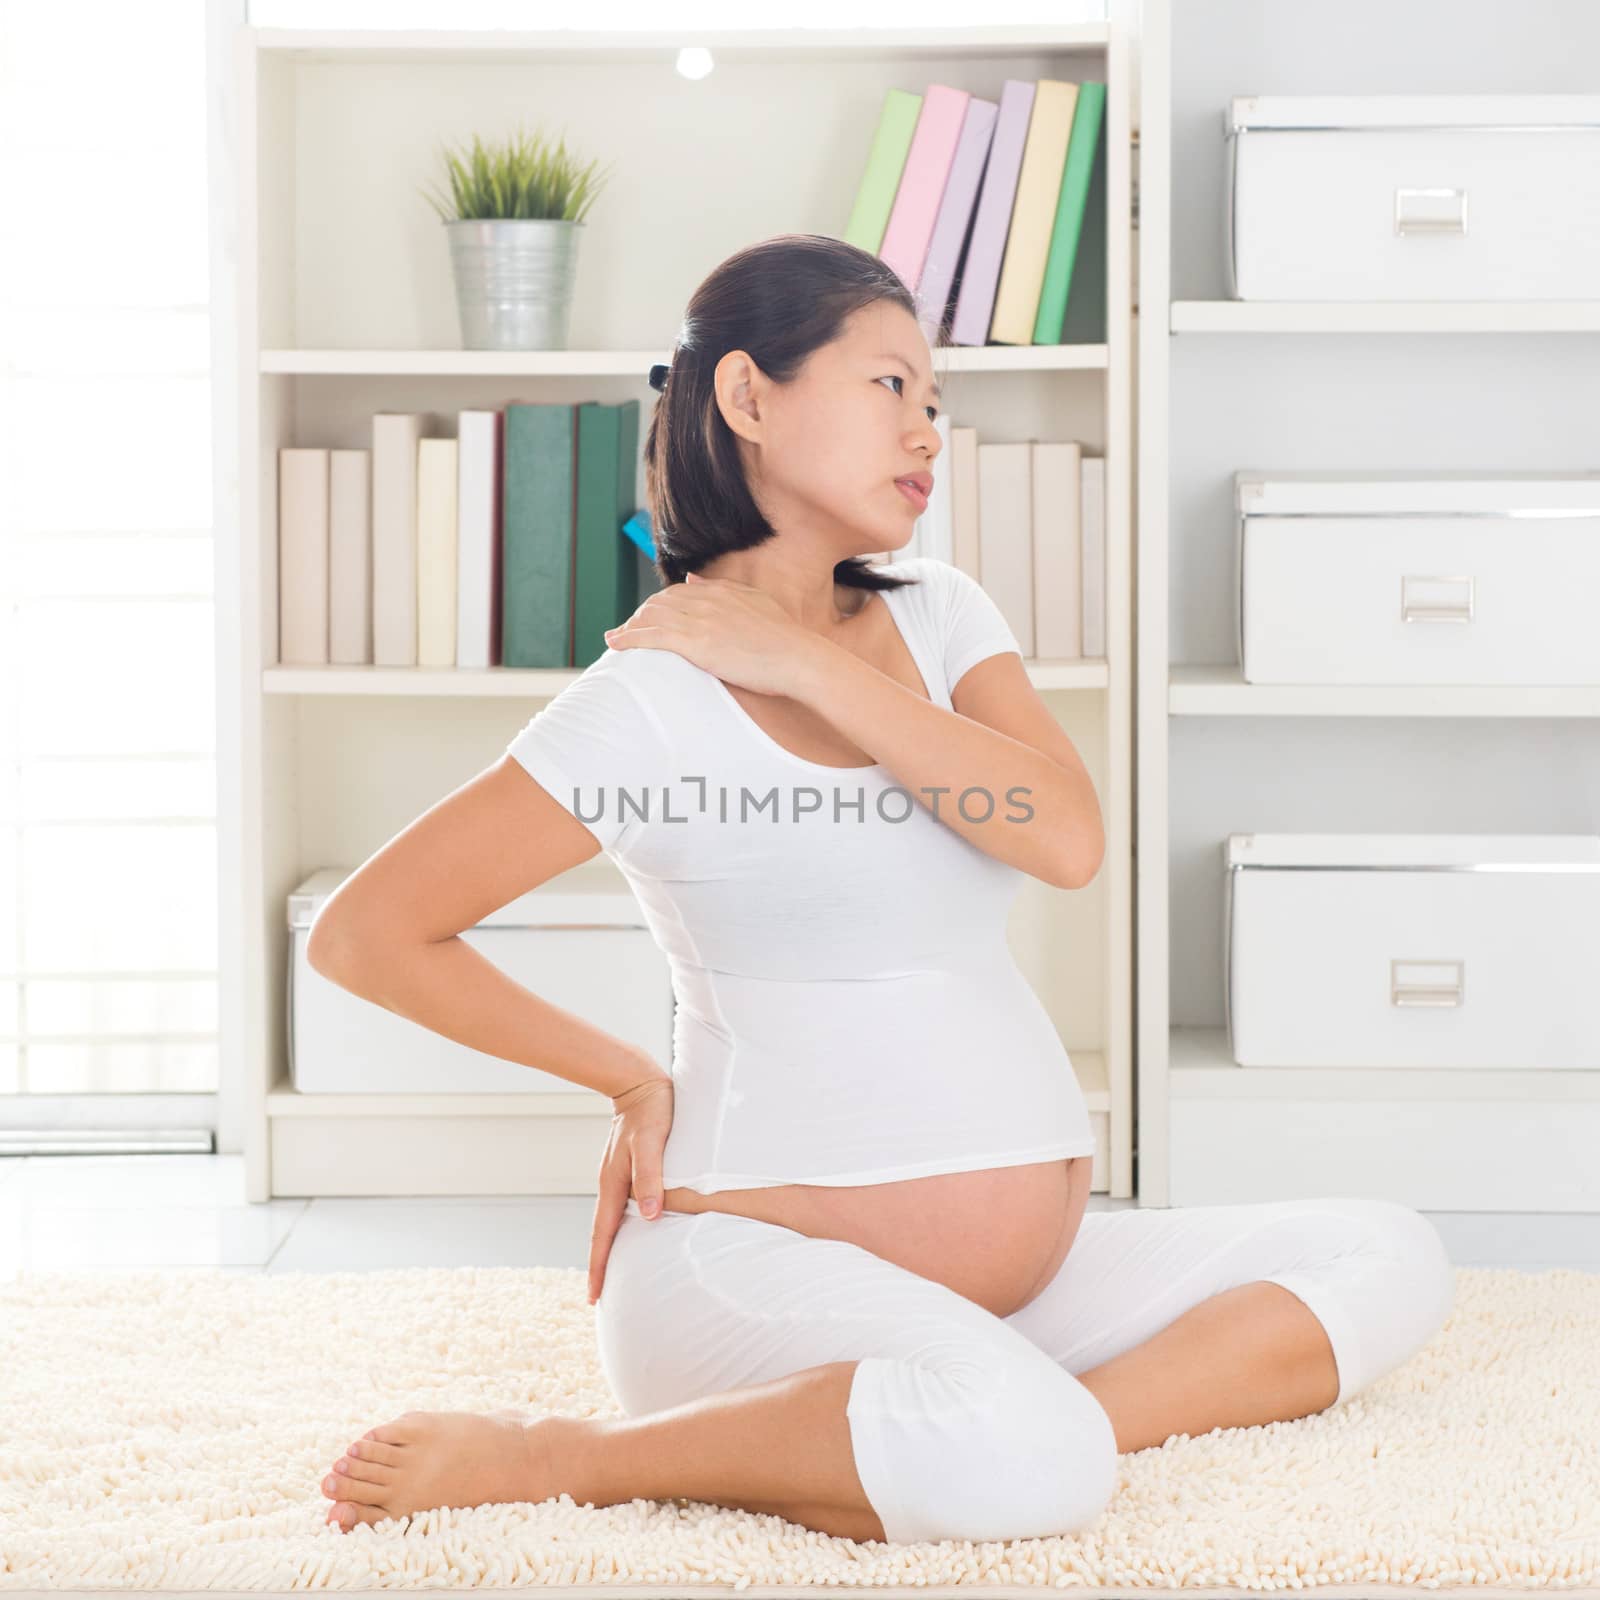 Shoulder or neck pain. Eight months pregnant Asian woman holding her back and shoulder while sitting on a floor at home.